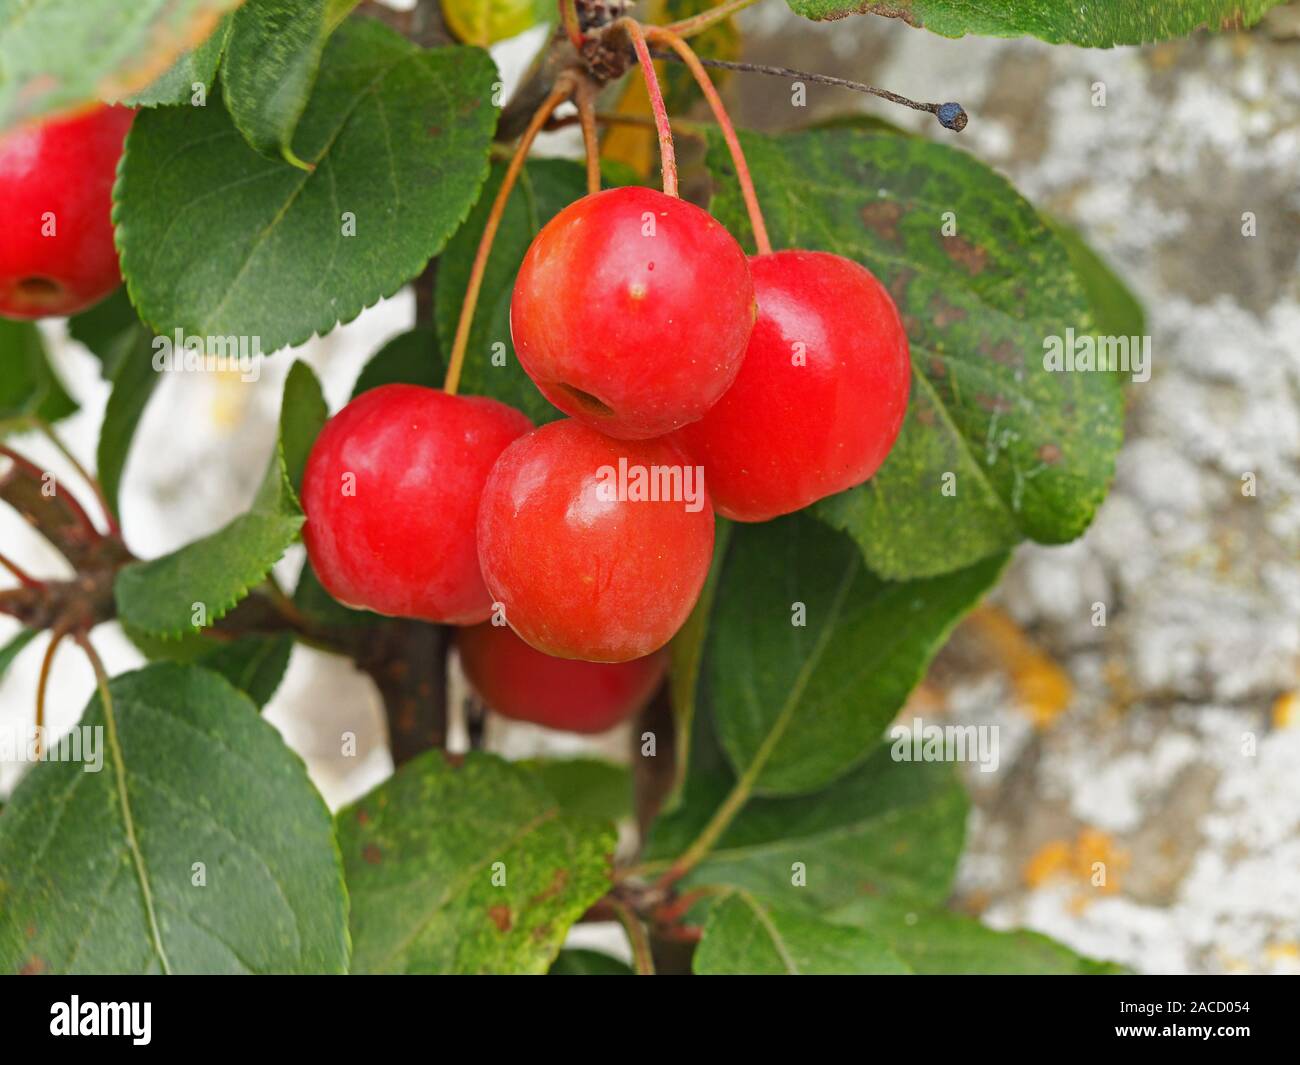 Small shiny red crab apples, variety Red Sentinel, on a tree branch with green leaves Stock Photo